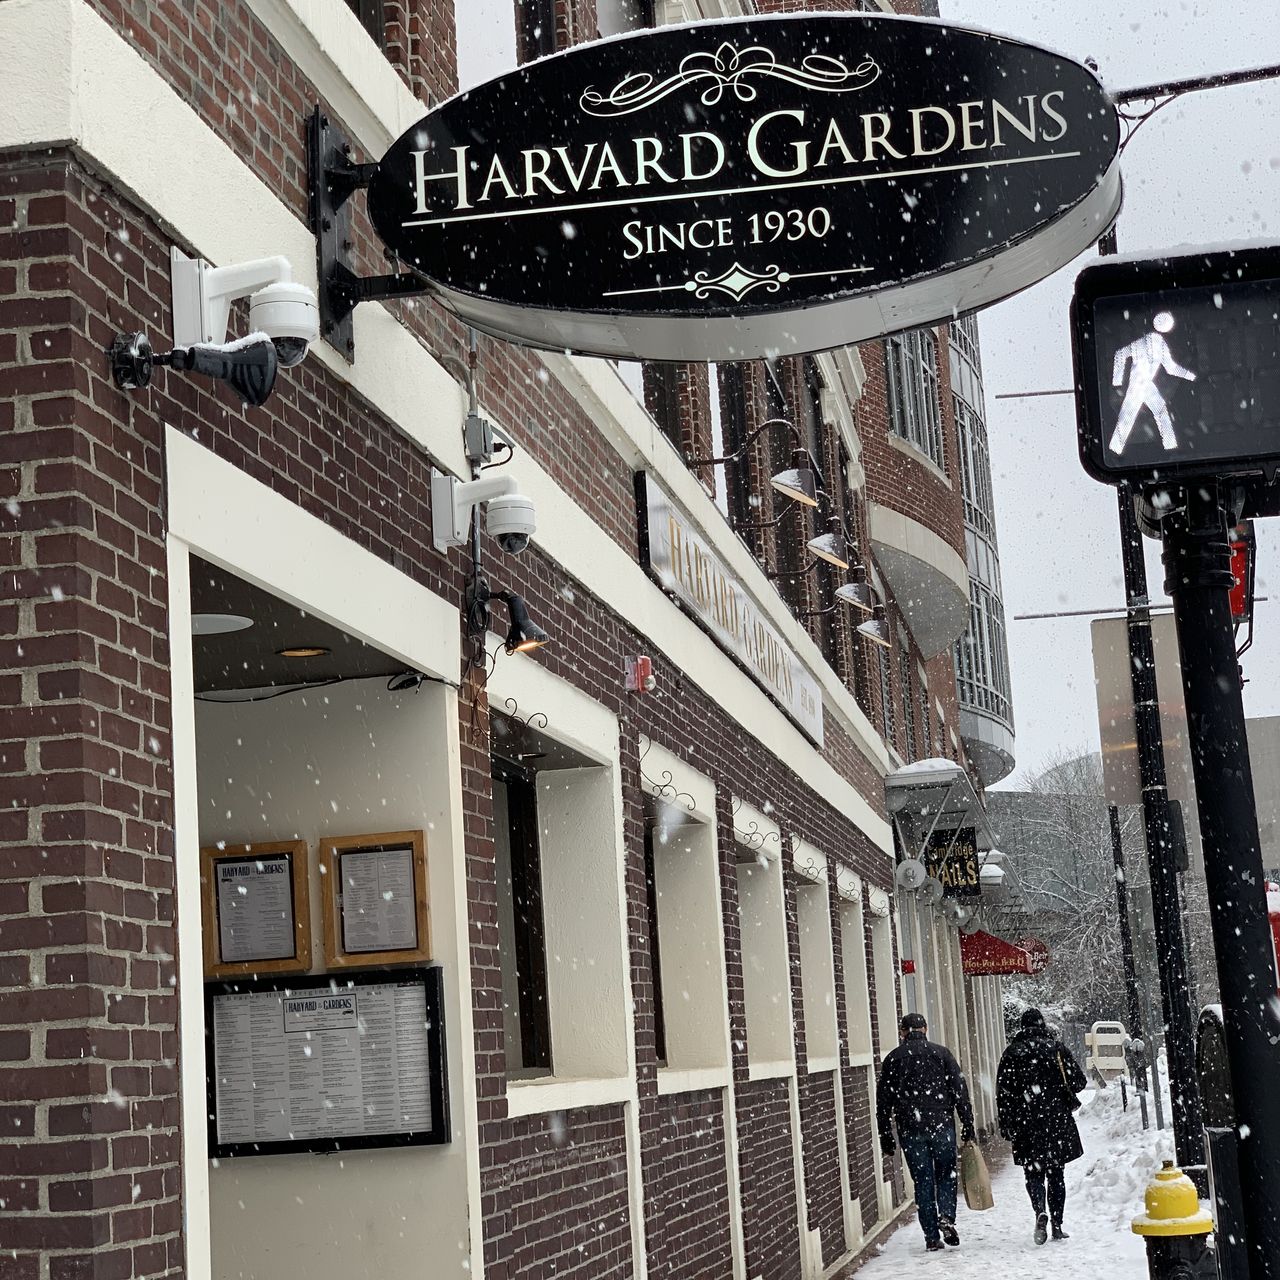 What To Do At Beacon Hill?, Harvard Gardens